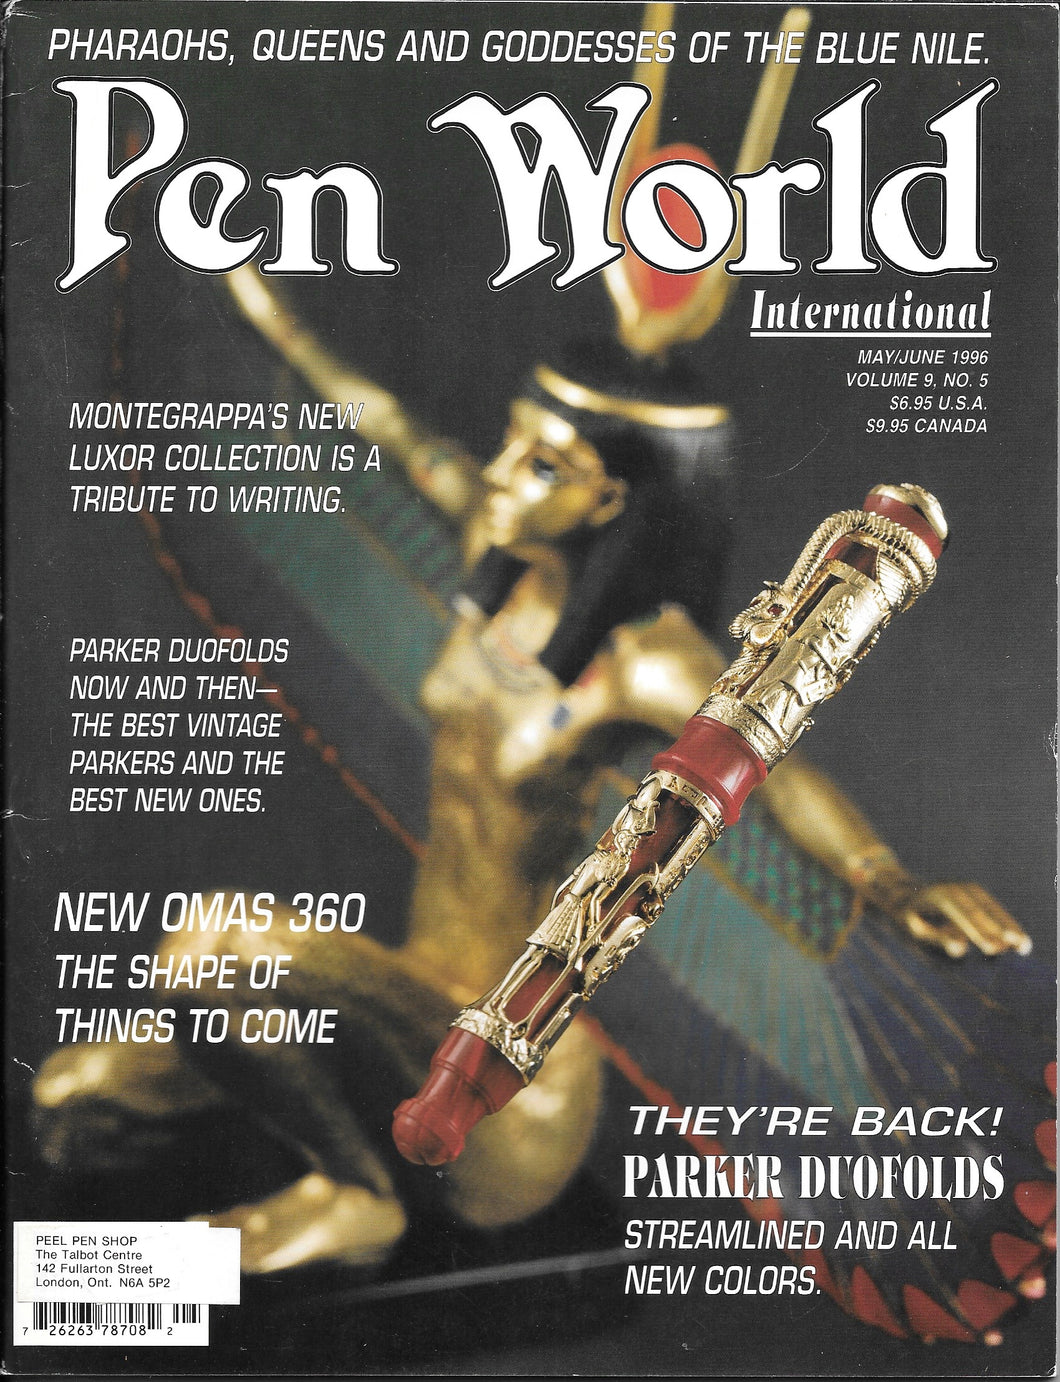 Pen World, Back Issues. May/June. 1996 Vol.9. No.5